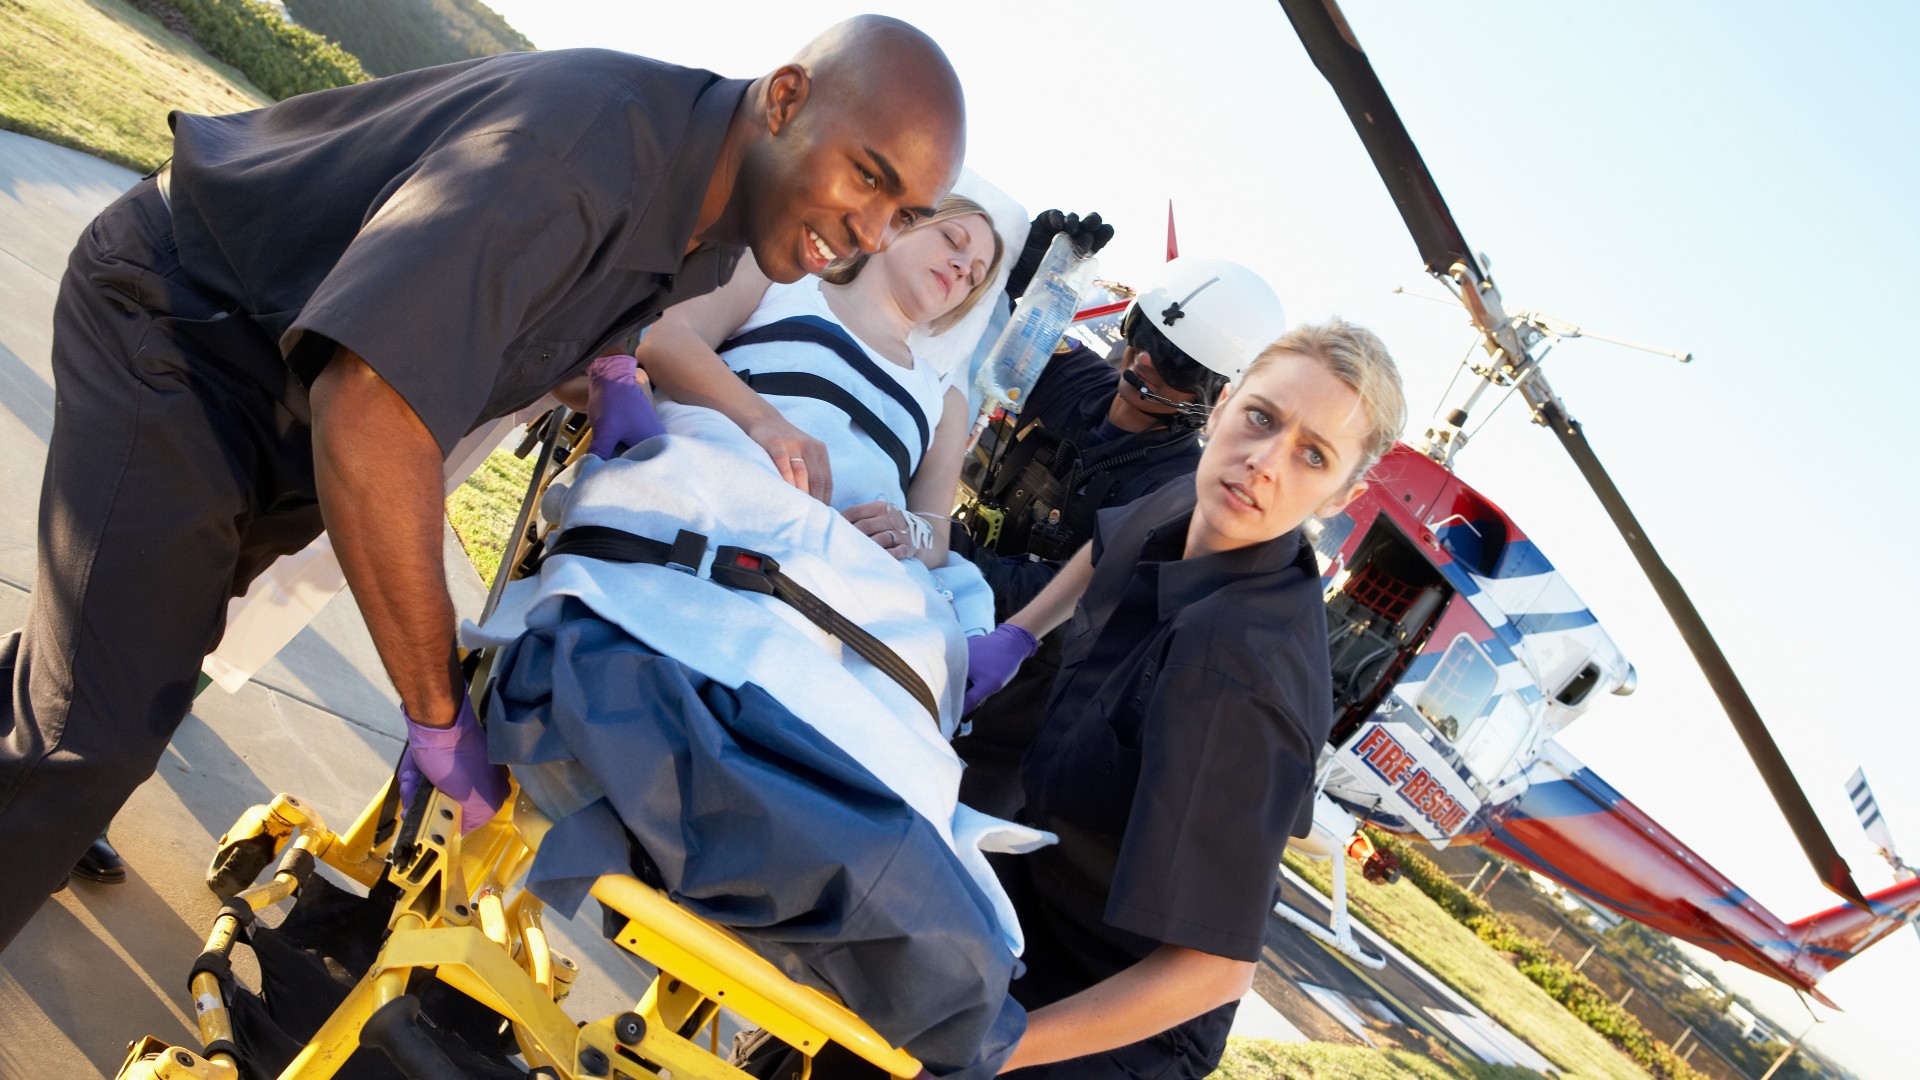 Two EMTs moving a patient on a stretcher from a helicopter